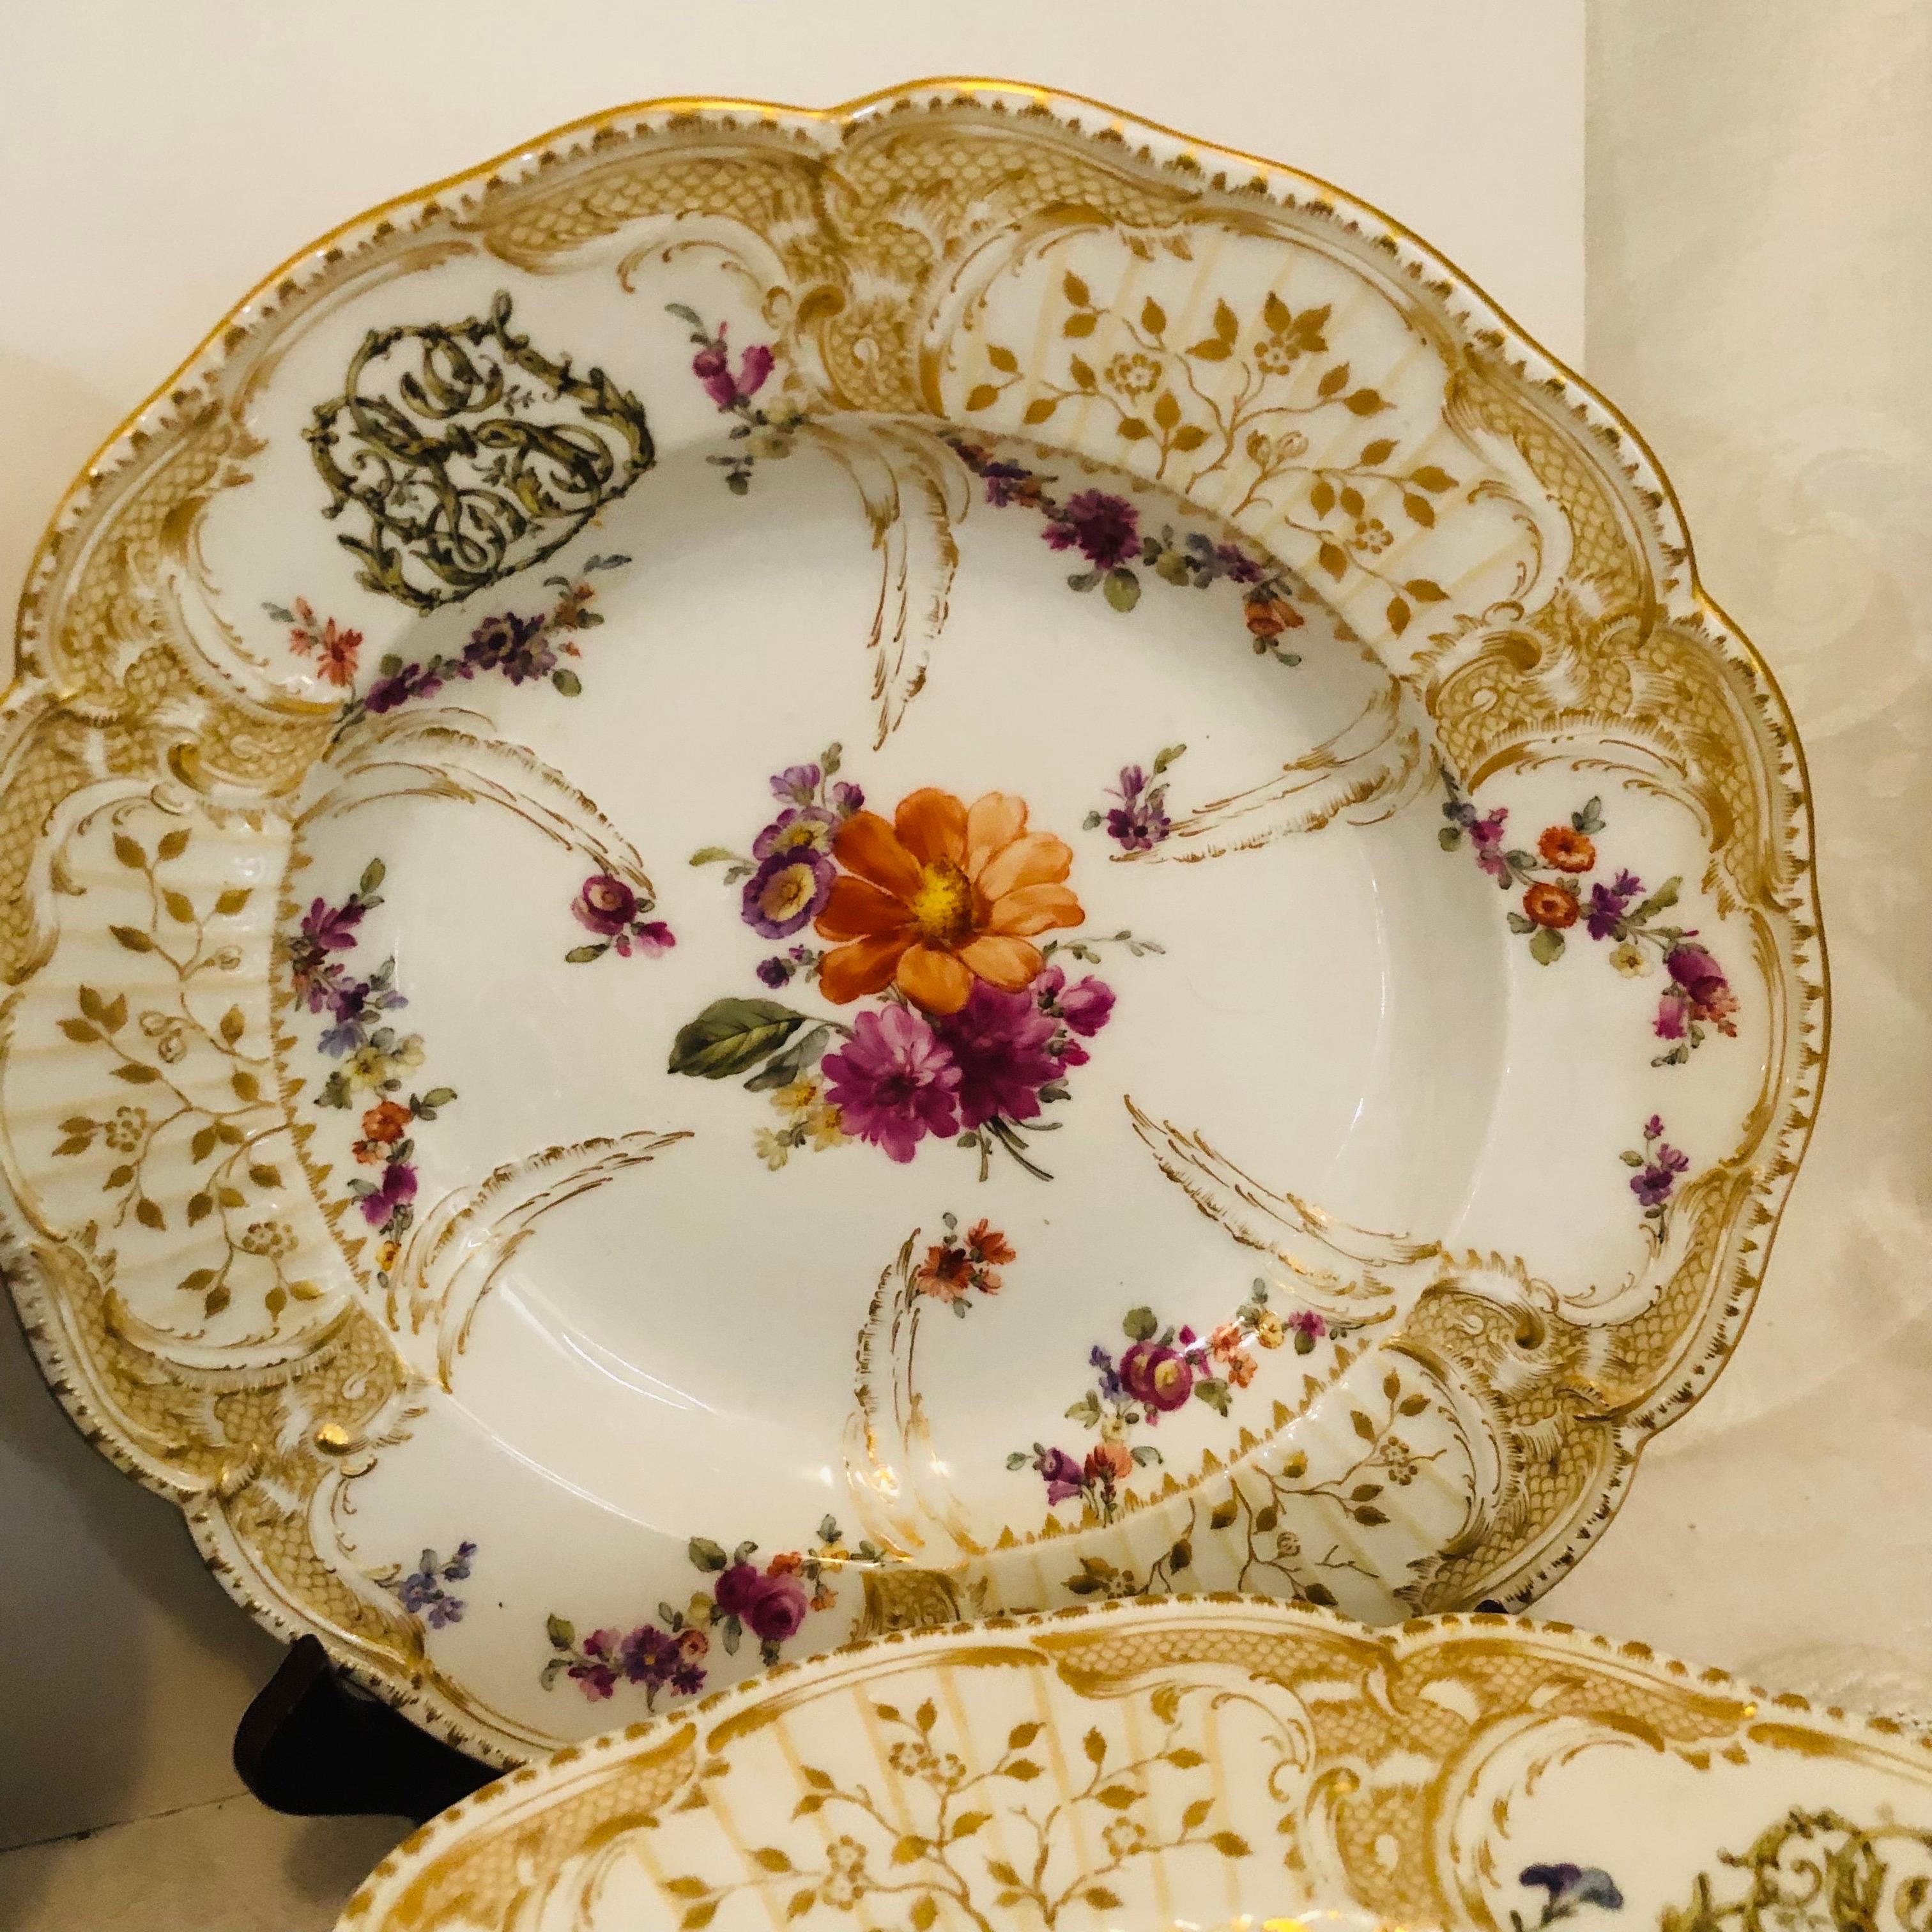 Early 20th Century 8 KPM Dinner Plates & Rim Soups in the Manner of the Potsdam Service